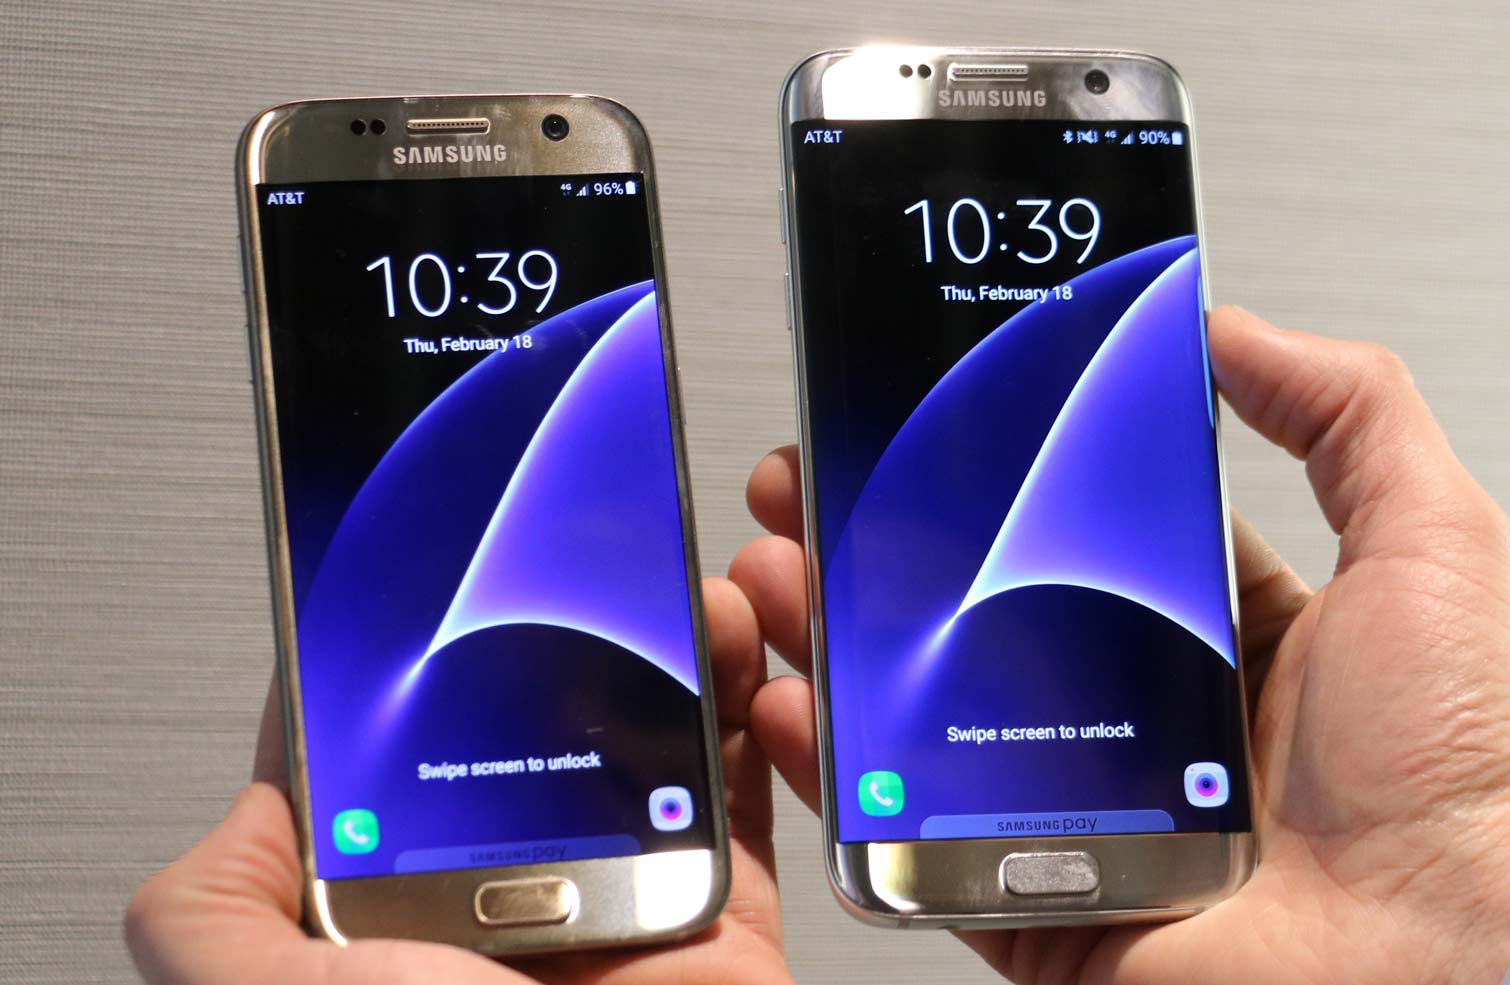 Galaxy S7 S6 vs S5: Should You Upgrade? | Tom's Guide